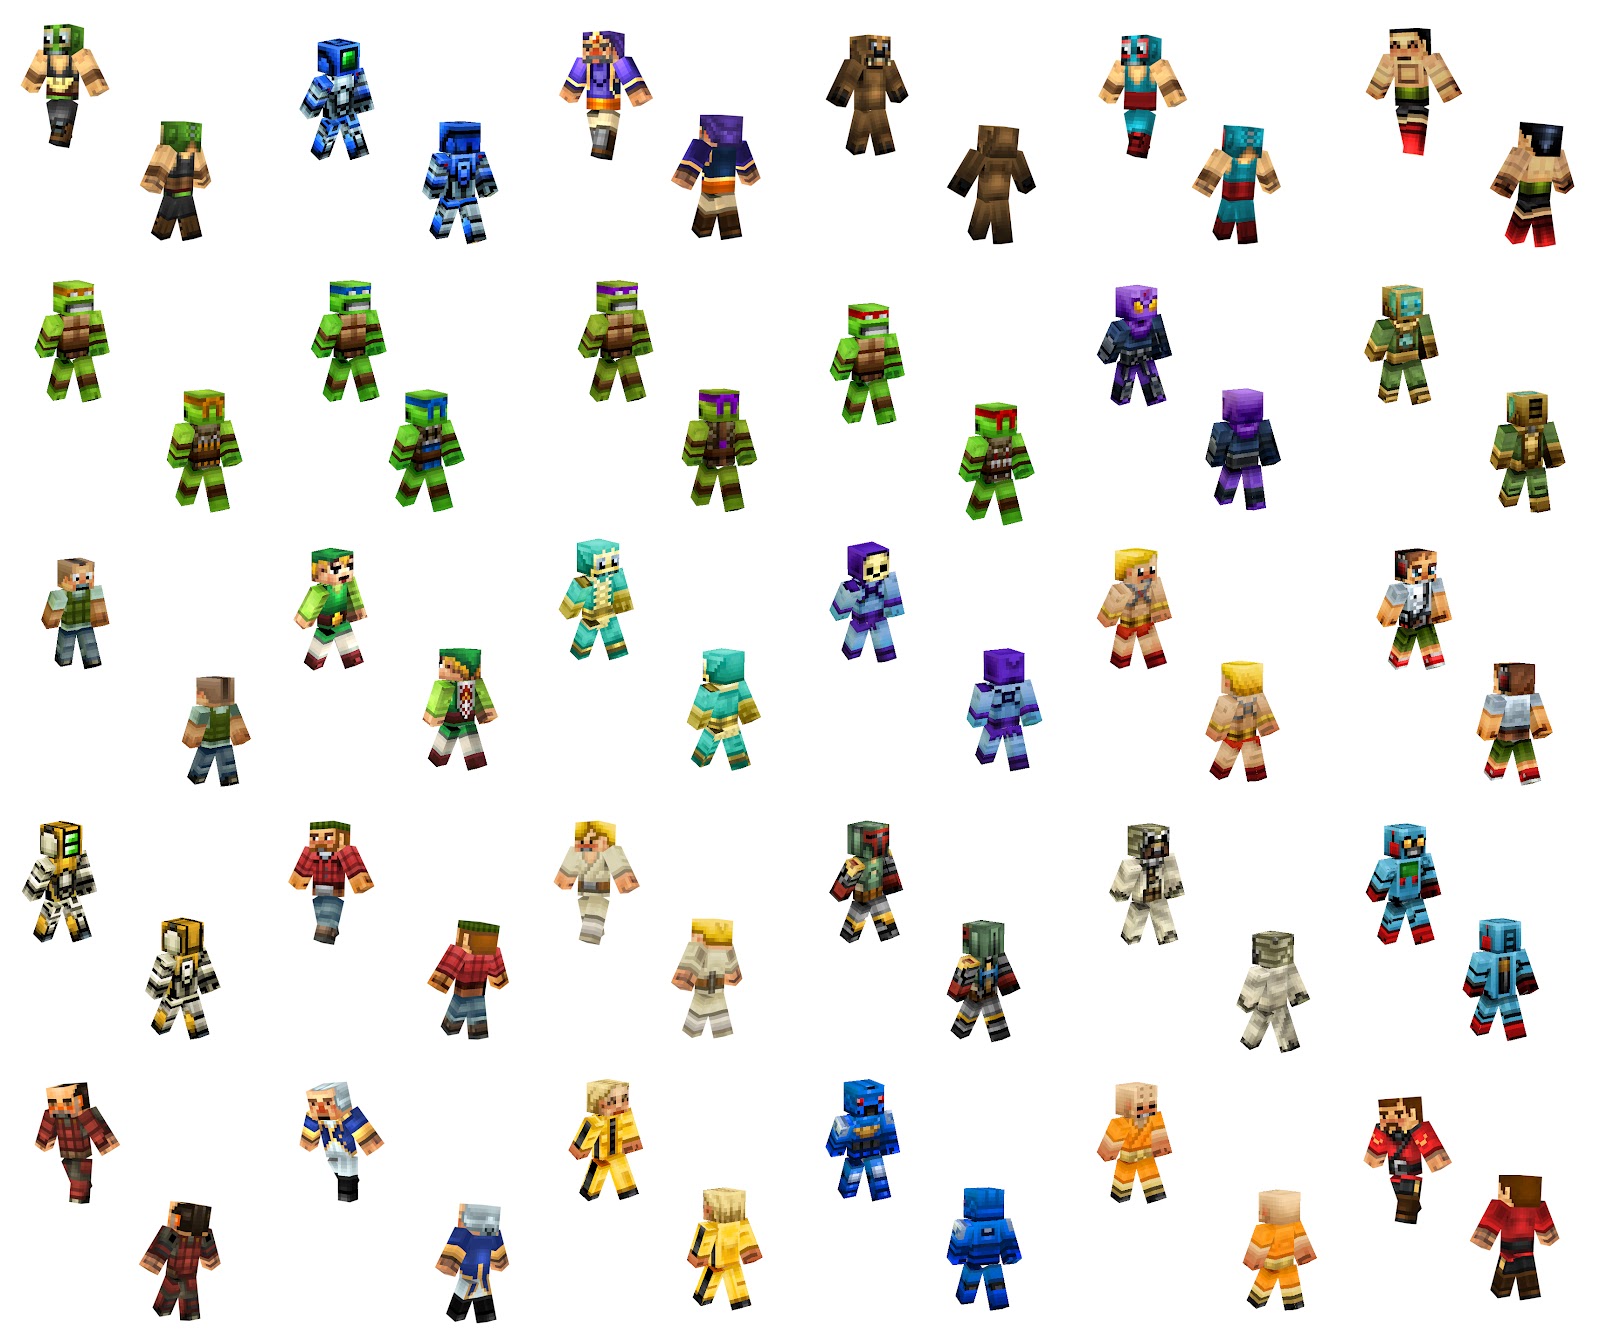 Yesterday I Posted All My Minecraft Skins Up On Minecraftskins